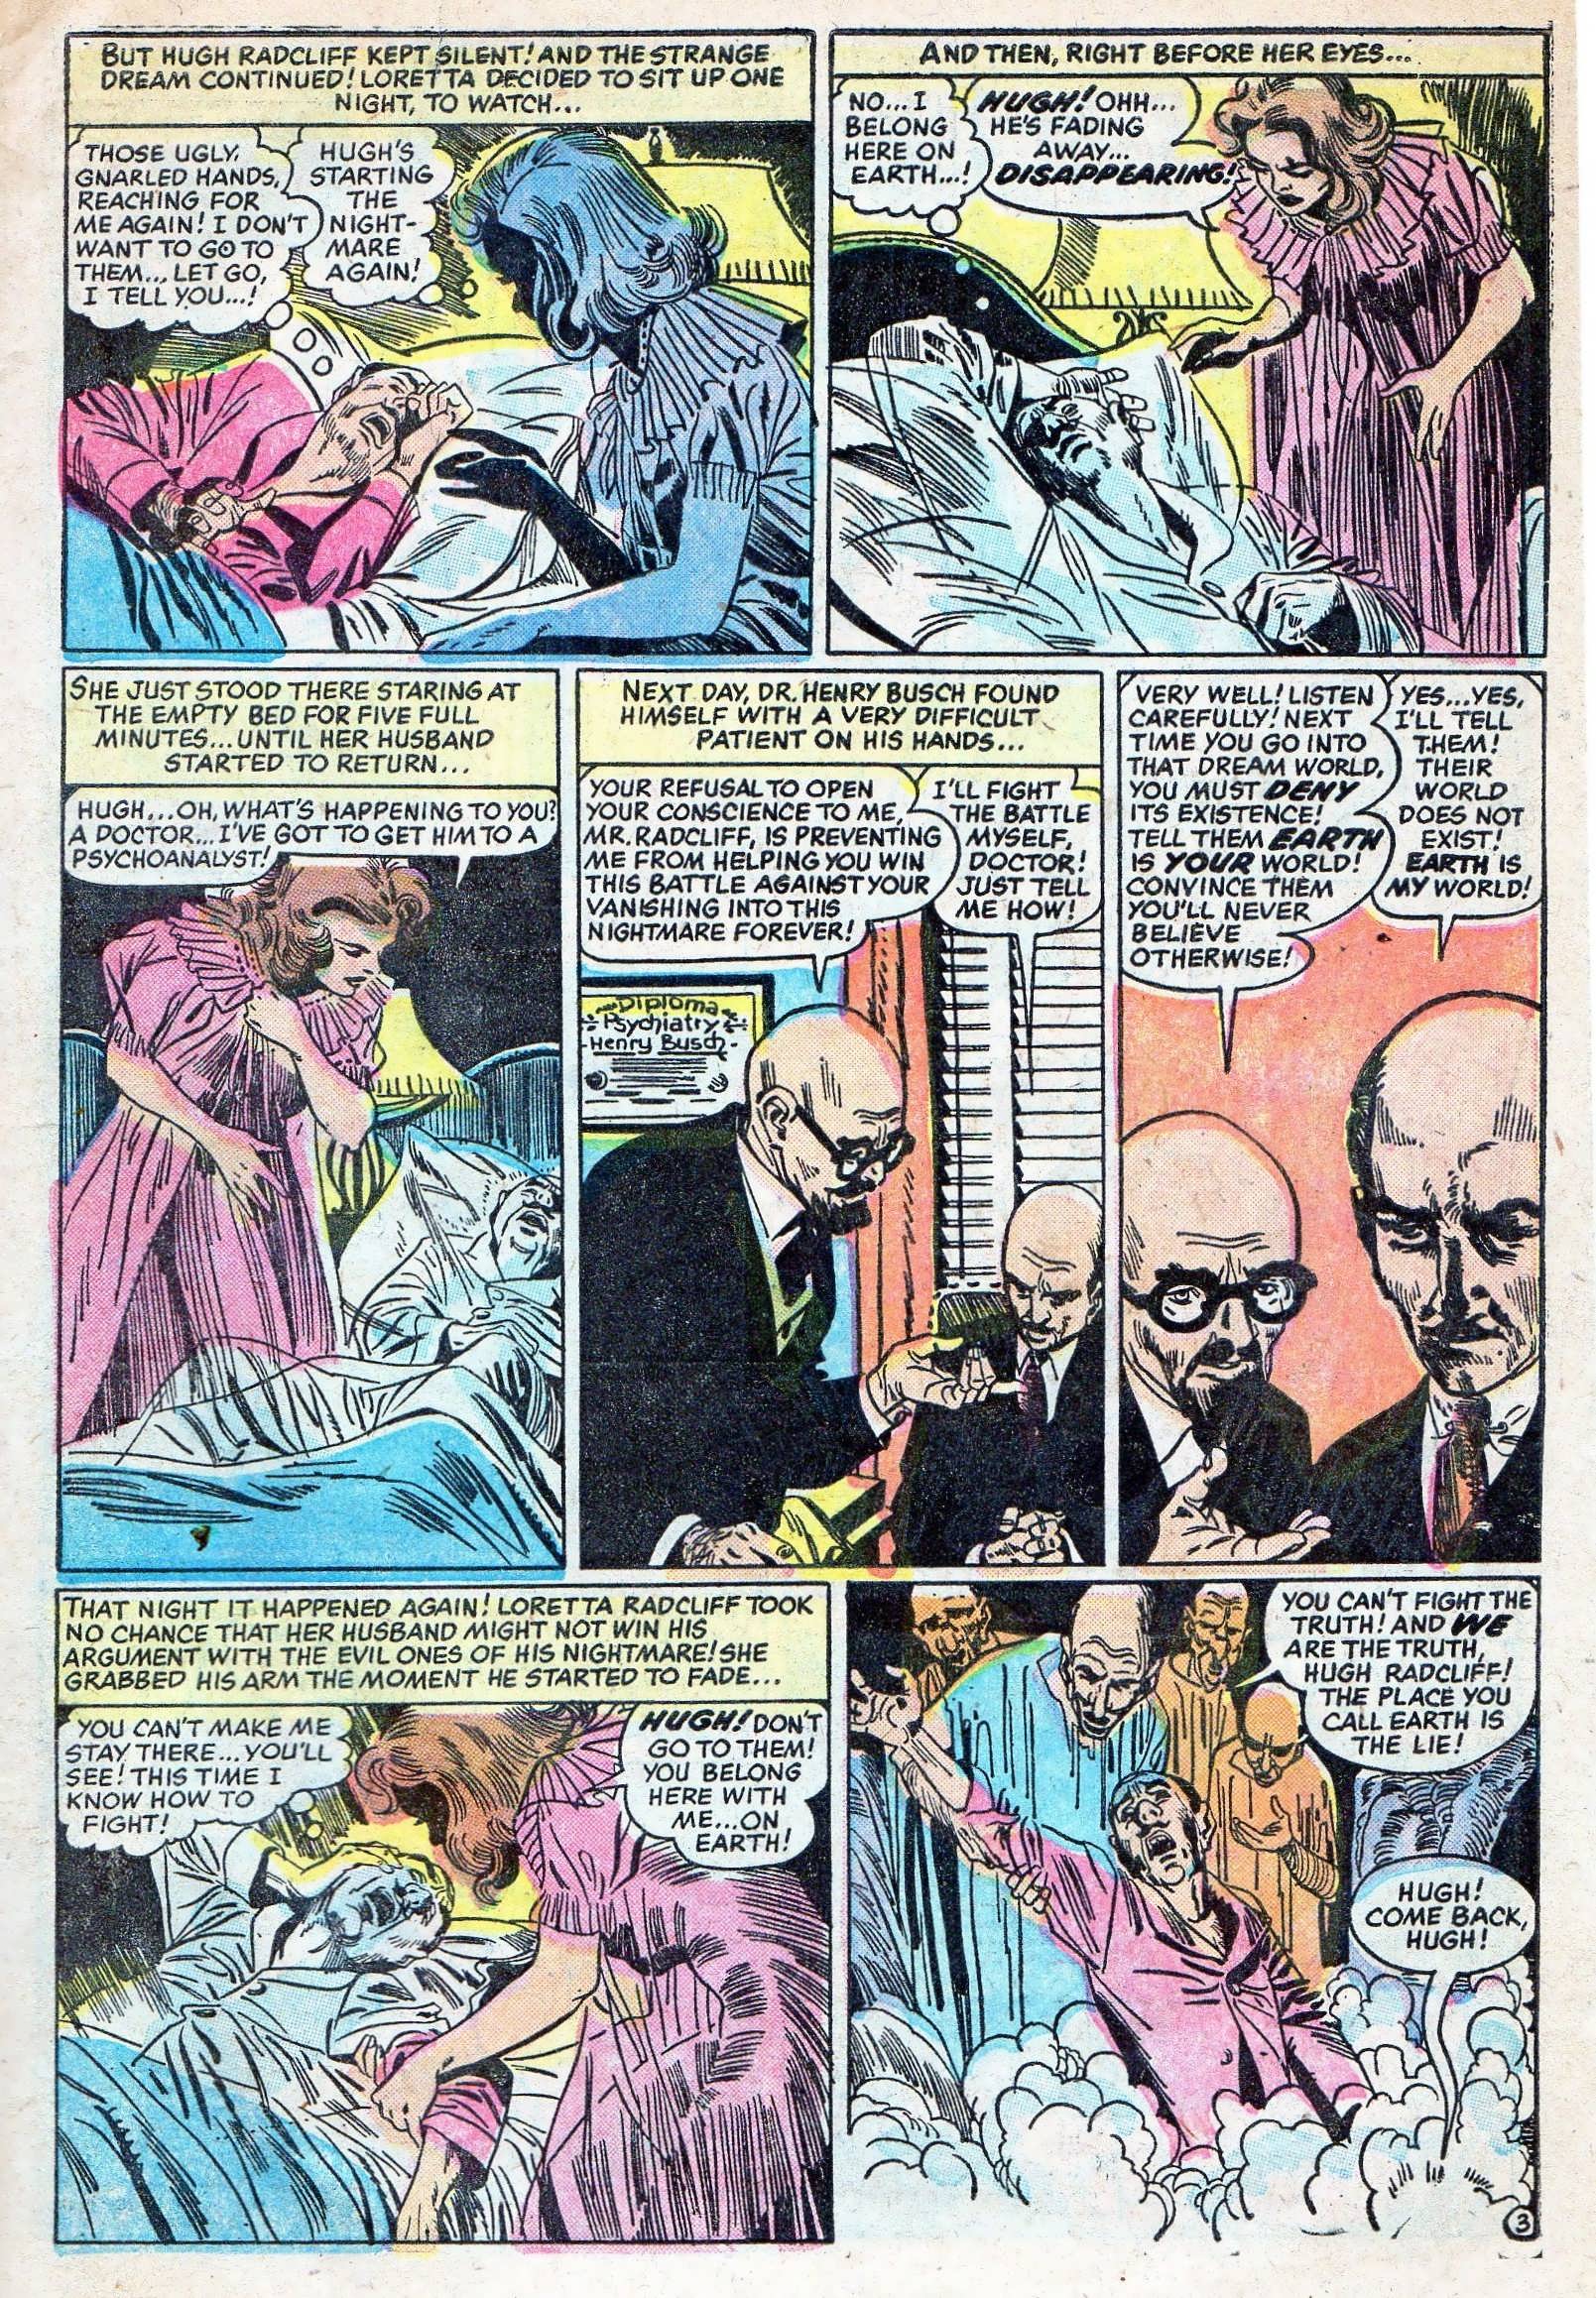 Marvel Tales (1949) 159 Page 4